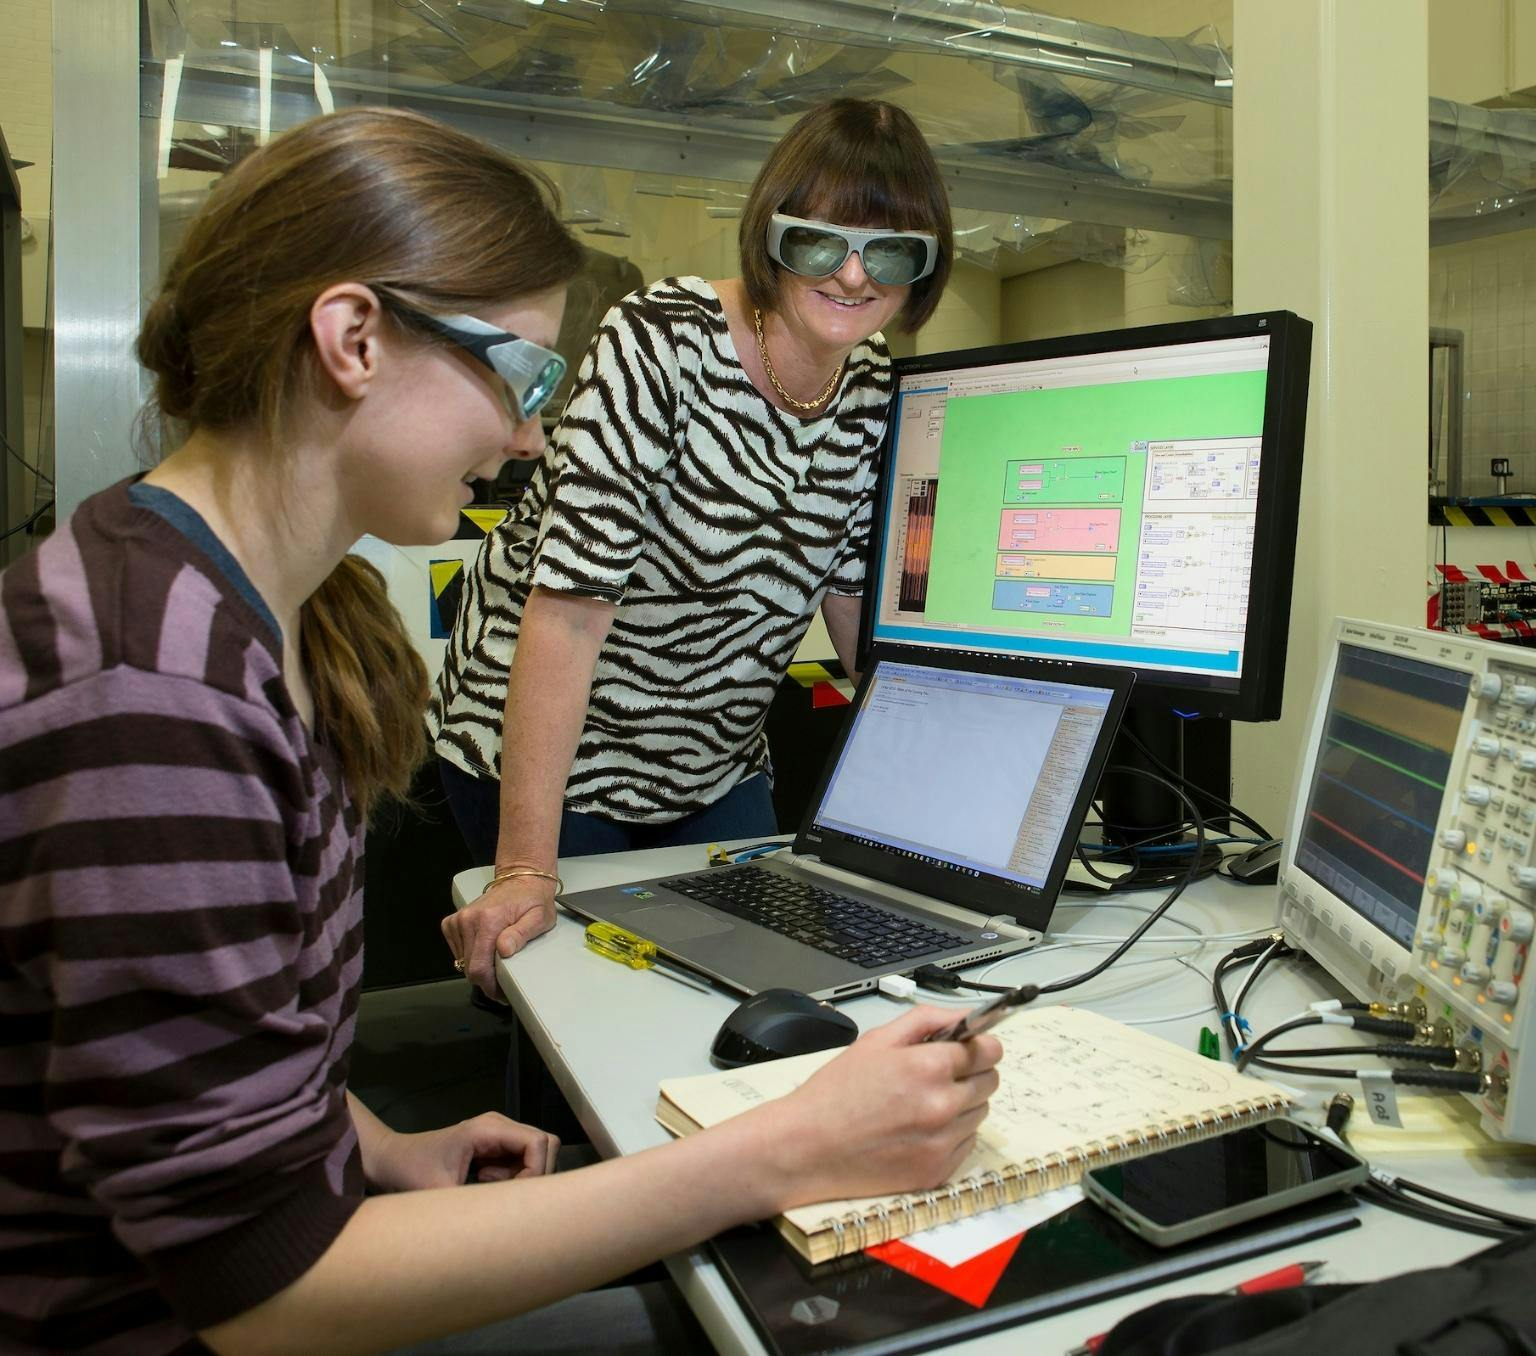 Susan is standing over a desk and watching a woman sitting at a computer with multiple screens around her. Both the women are smiling and wearing large grey reflective glasses